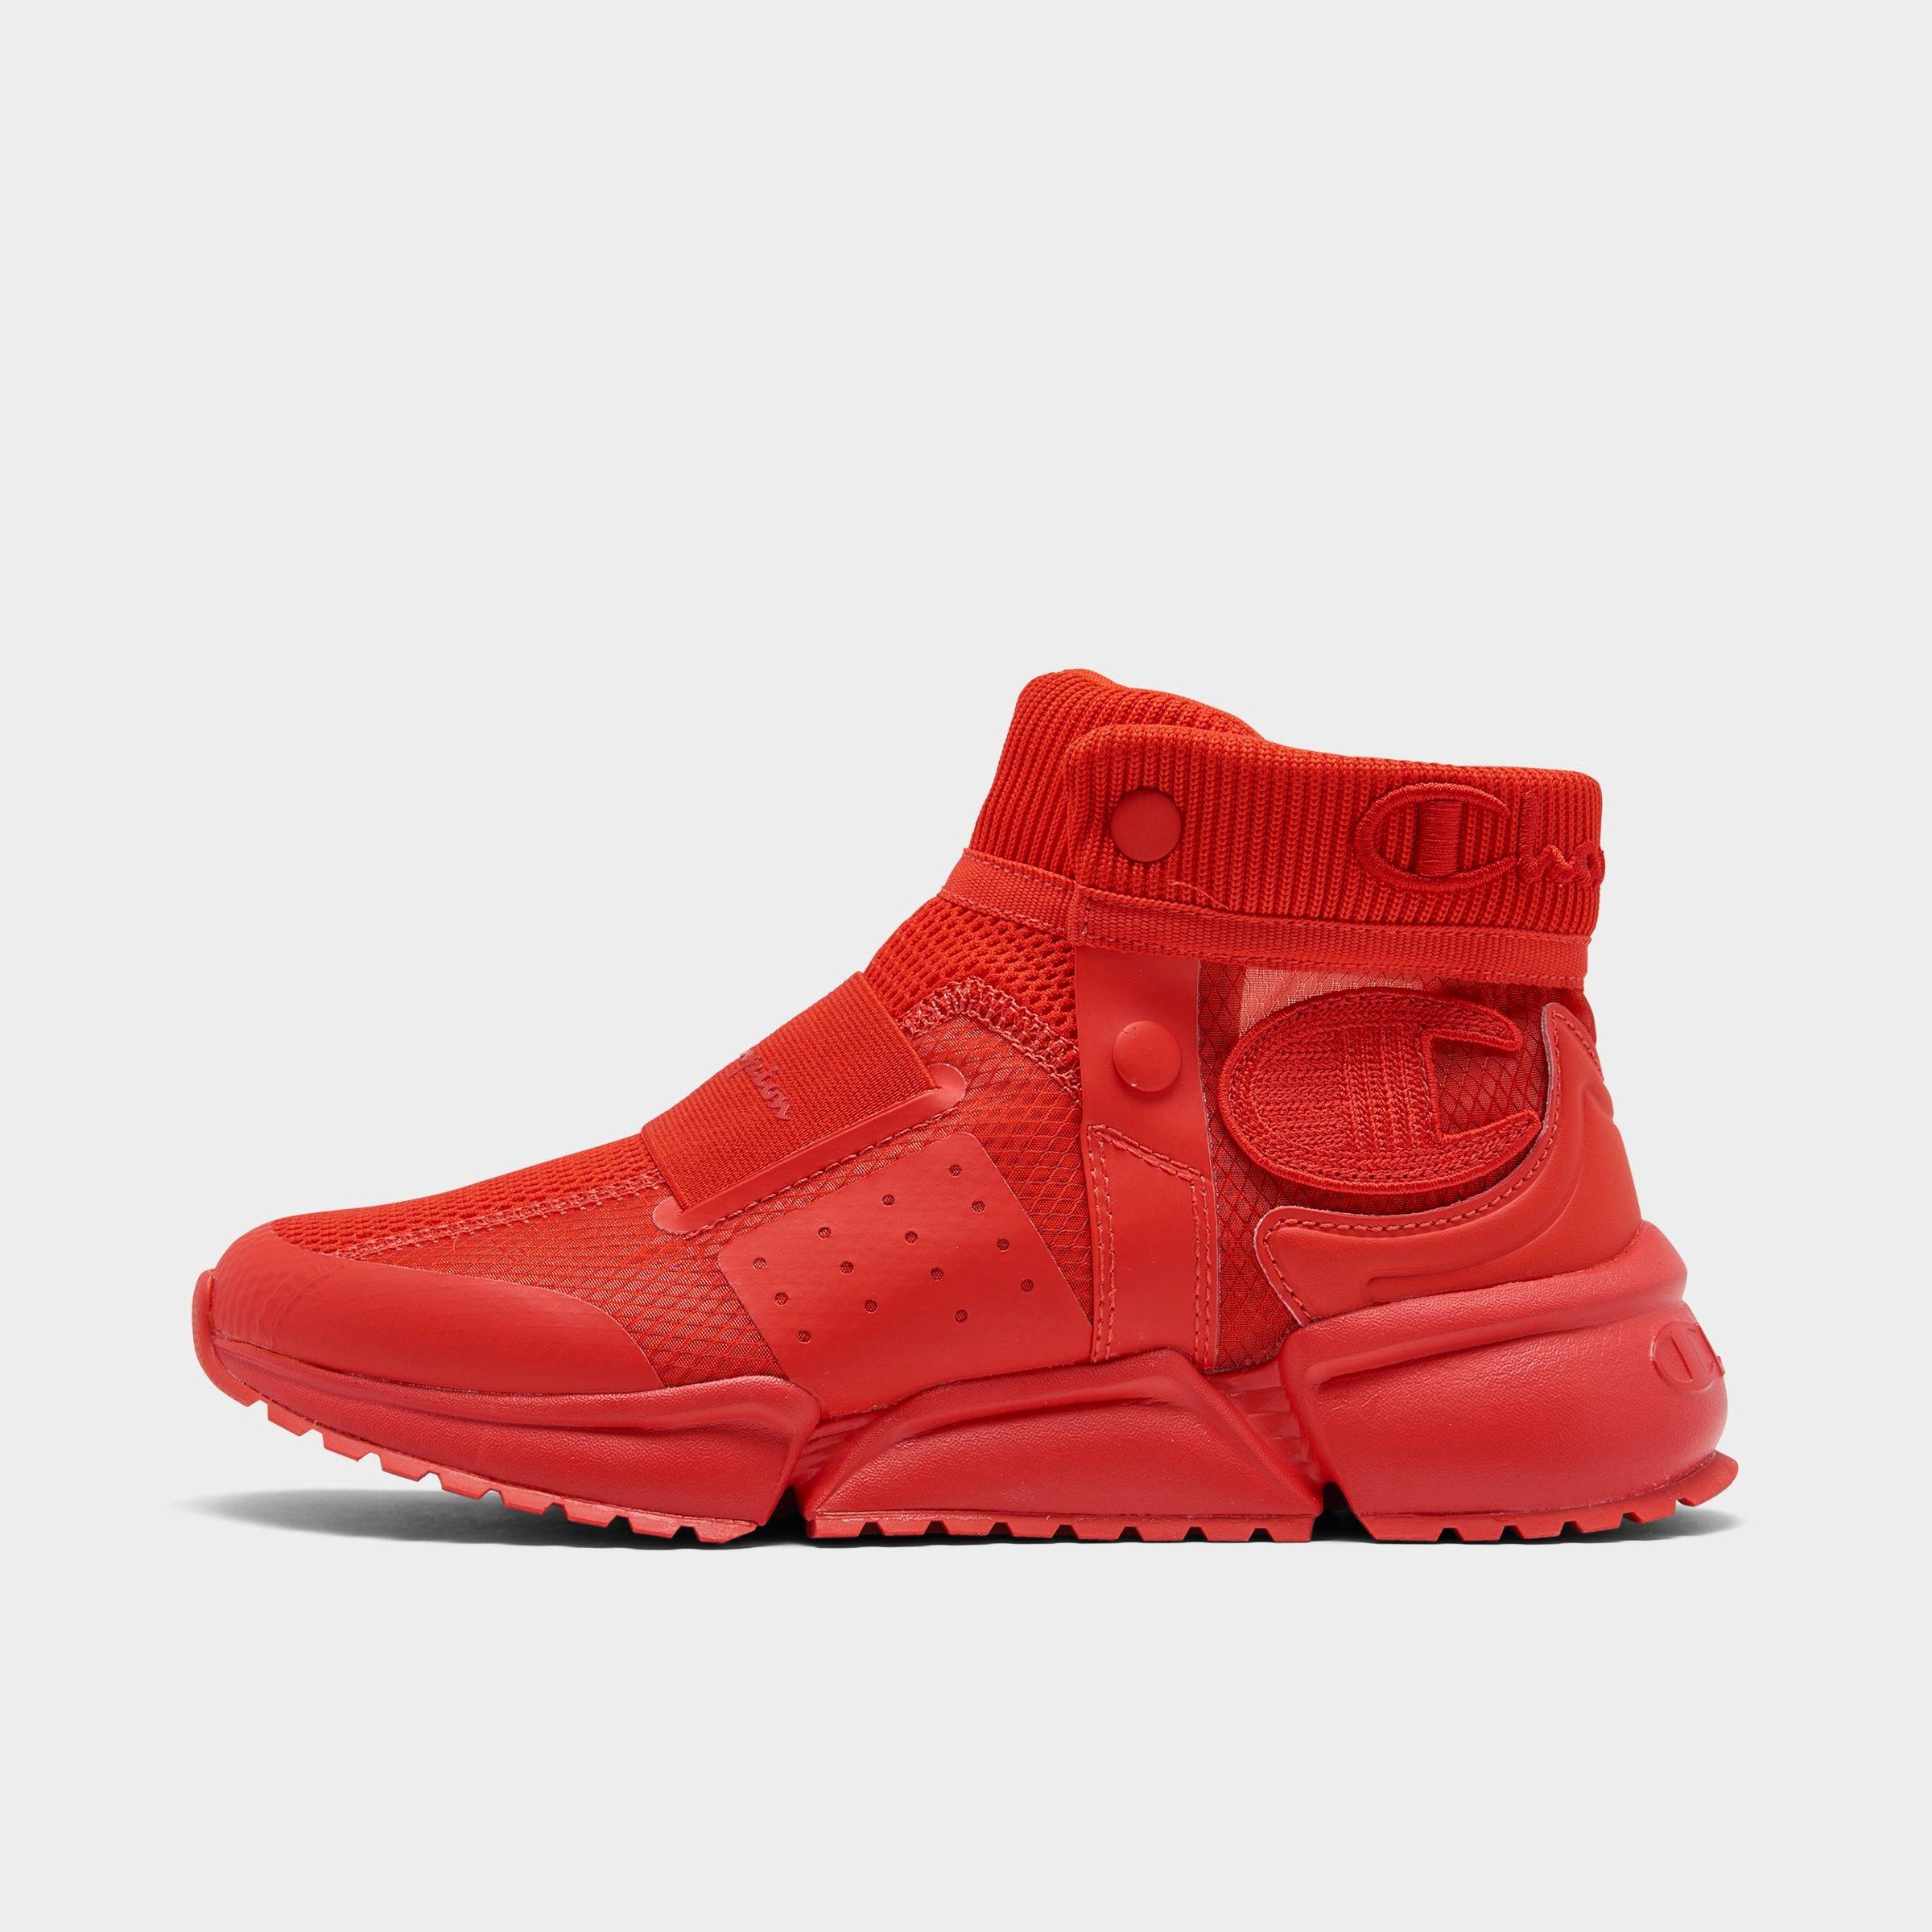 red champion shoes high top